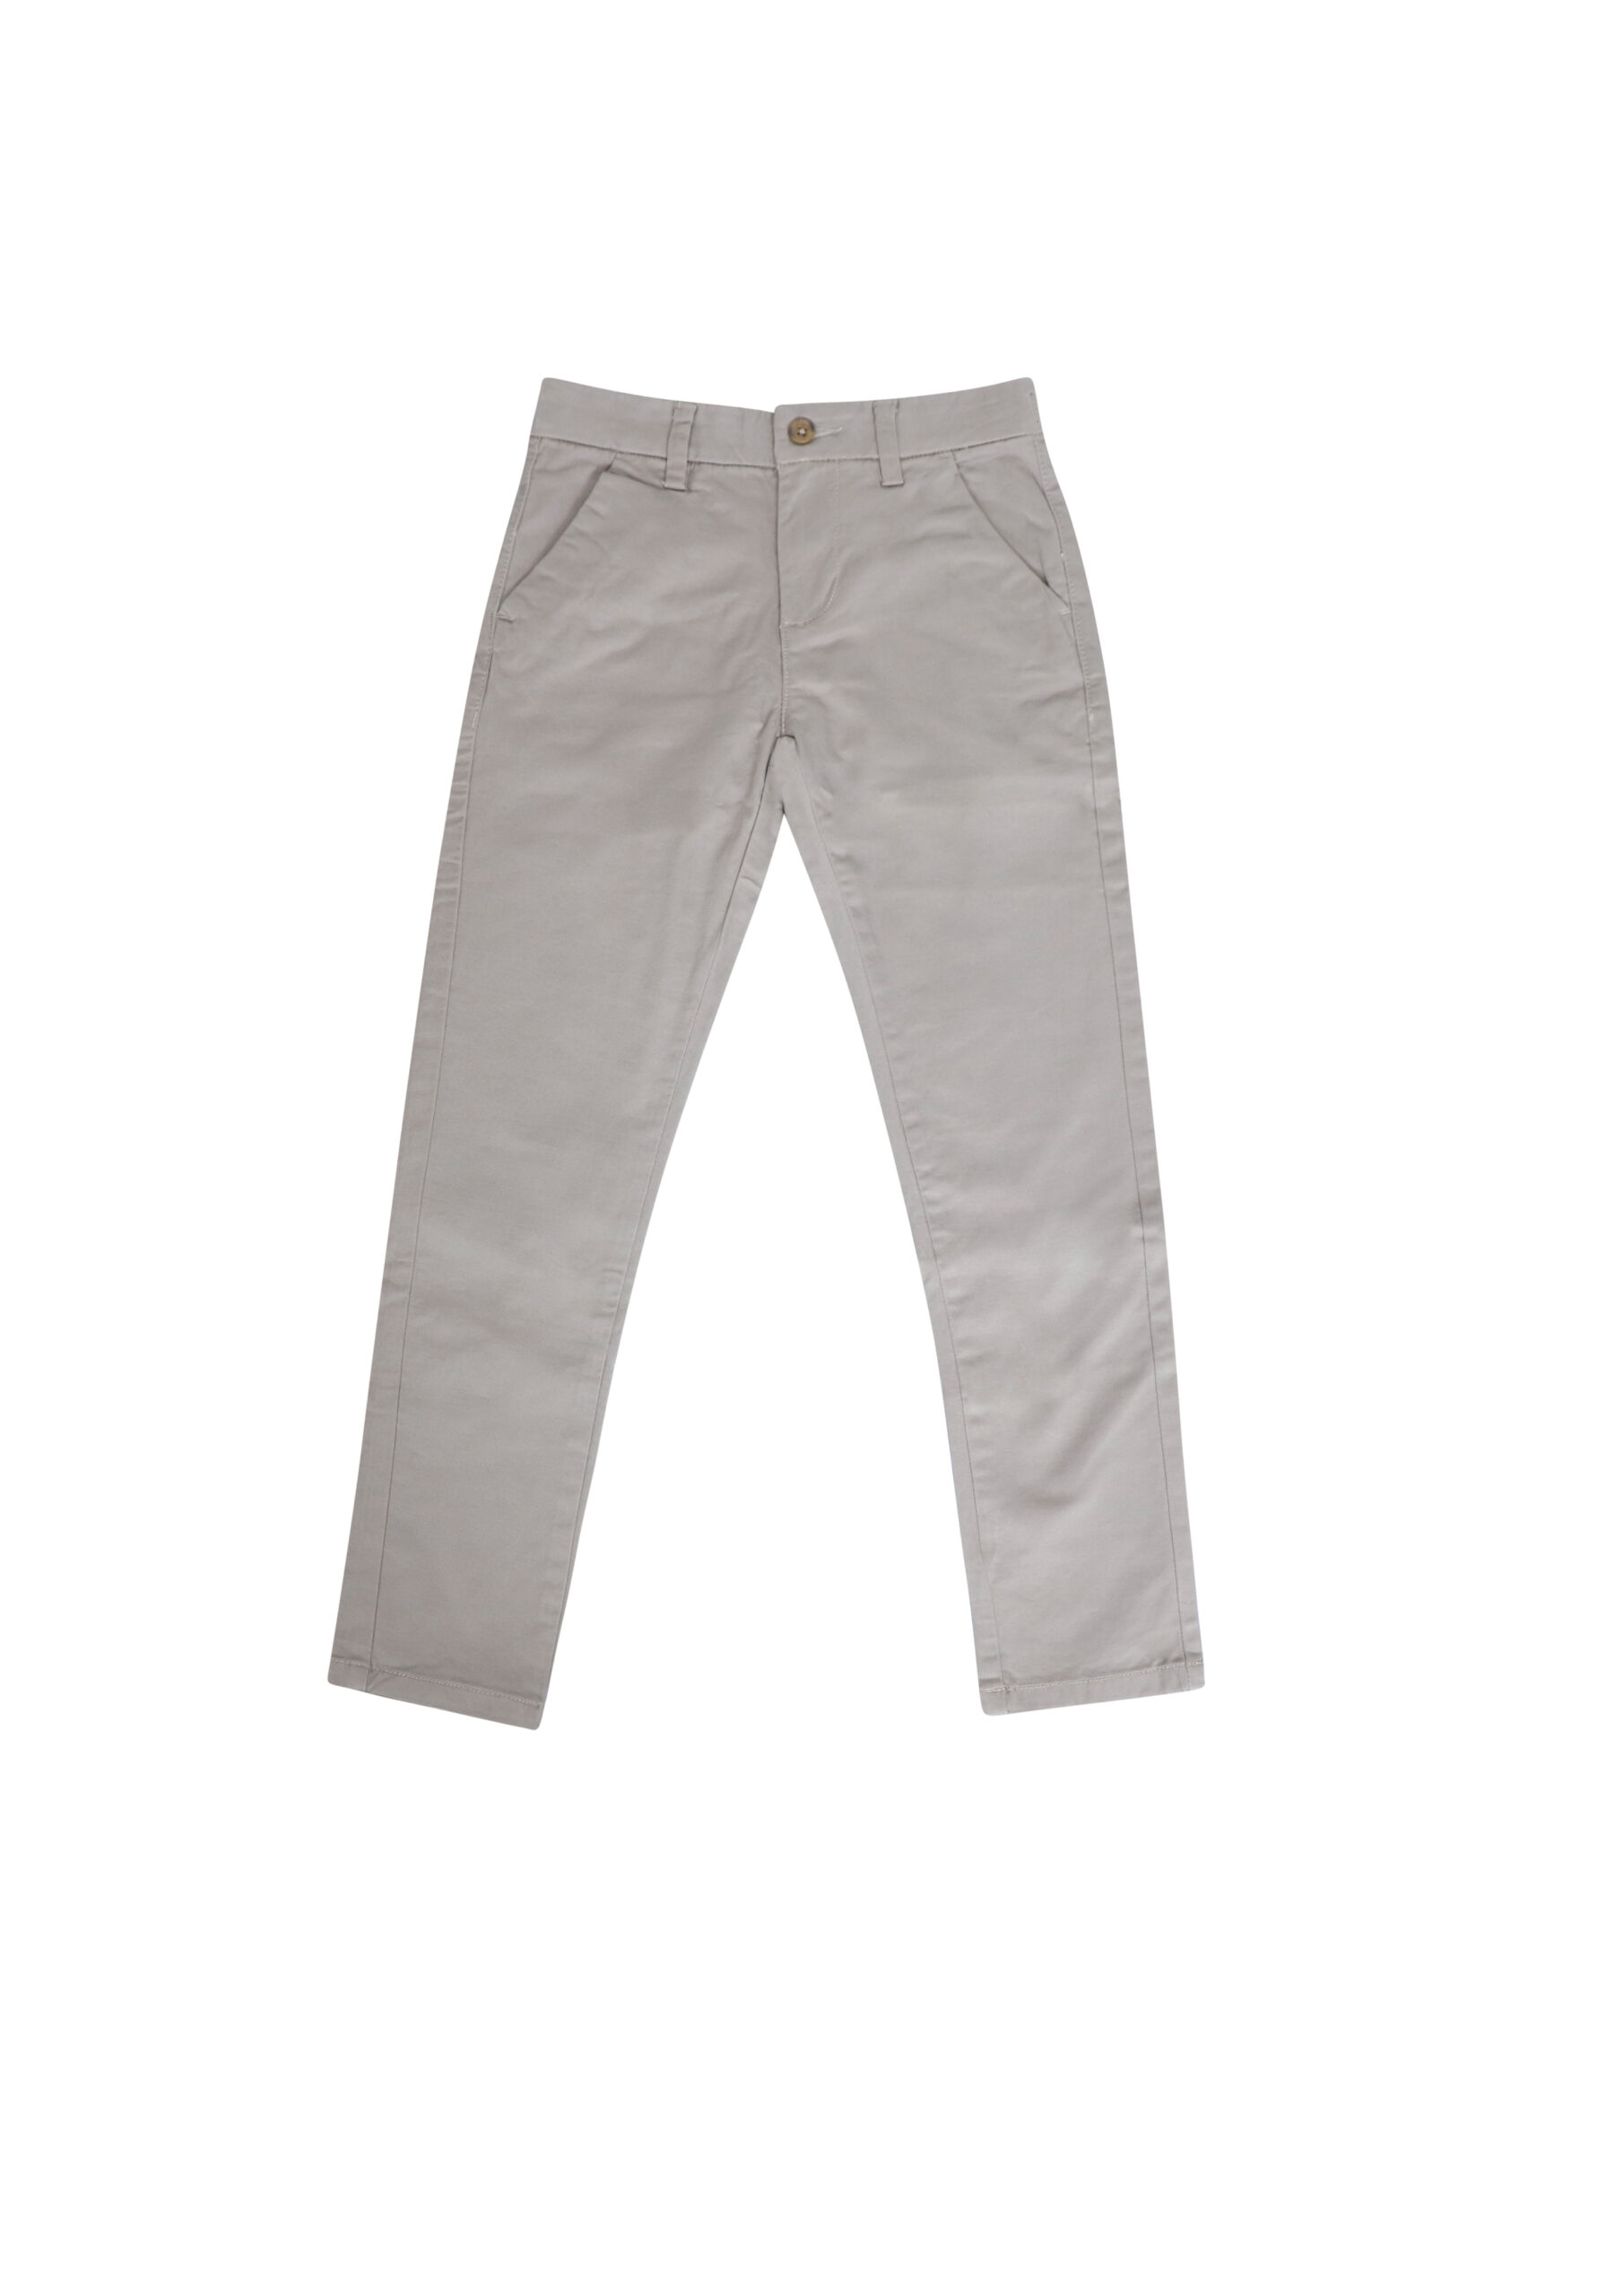 Boys Twill Pant - Artisan Outfitters Ltd